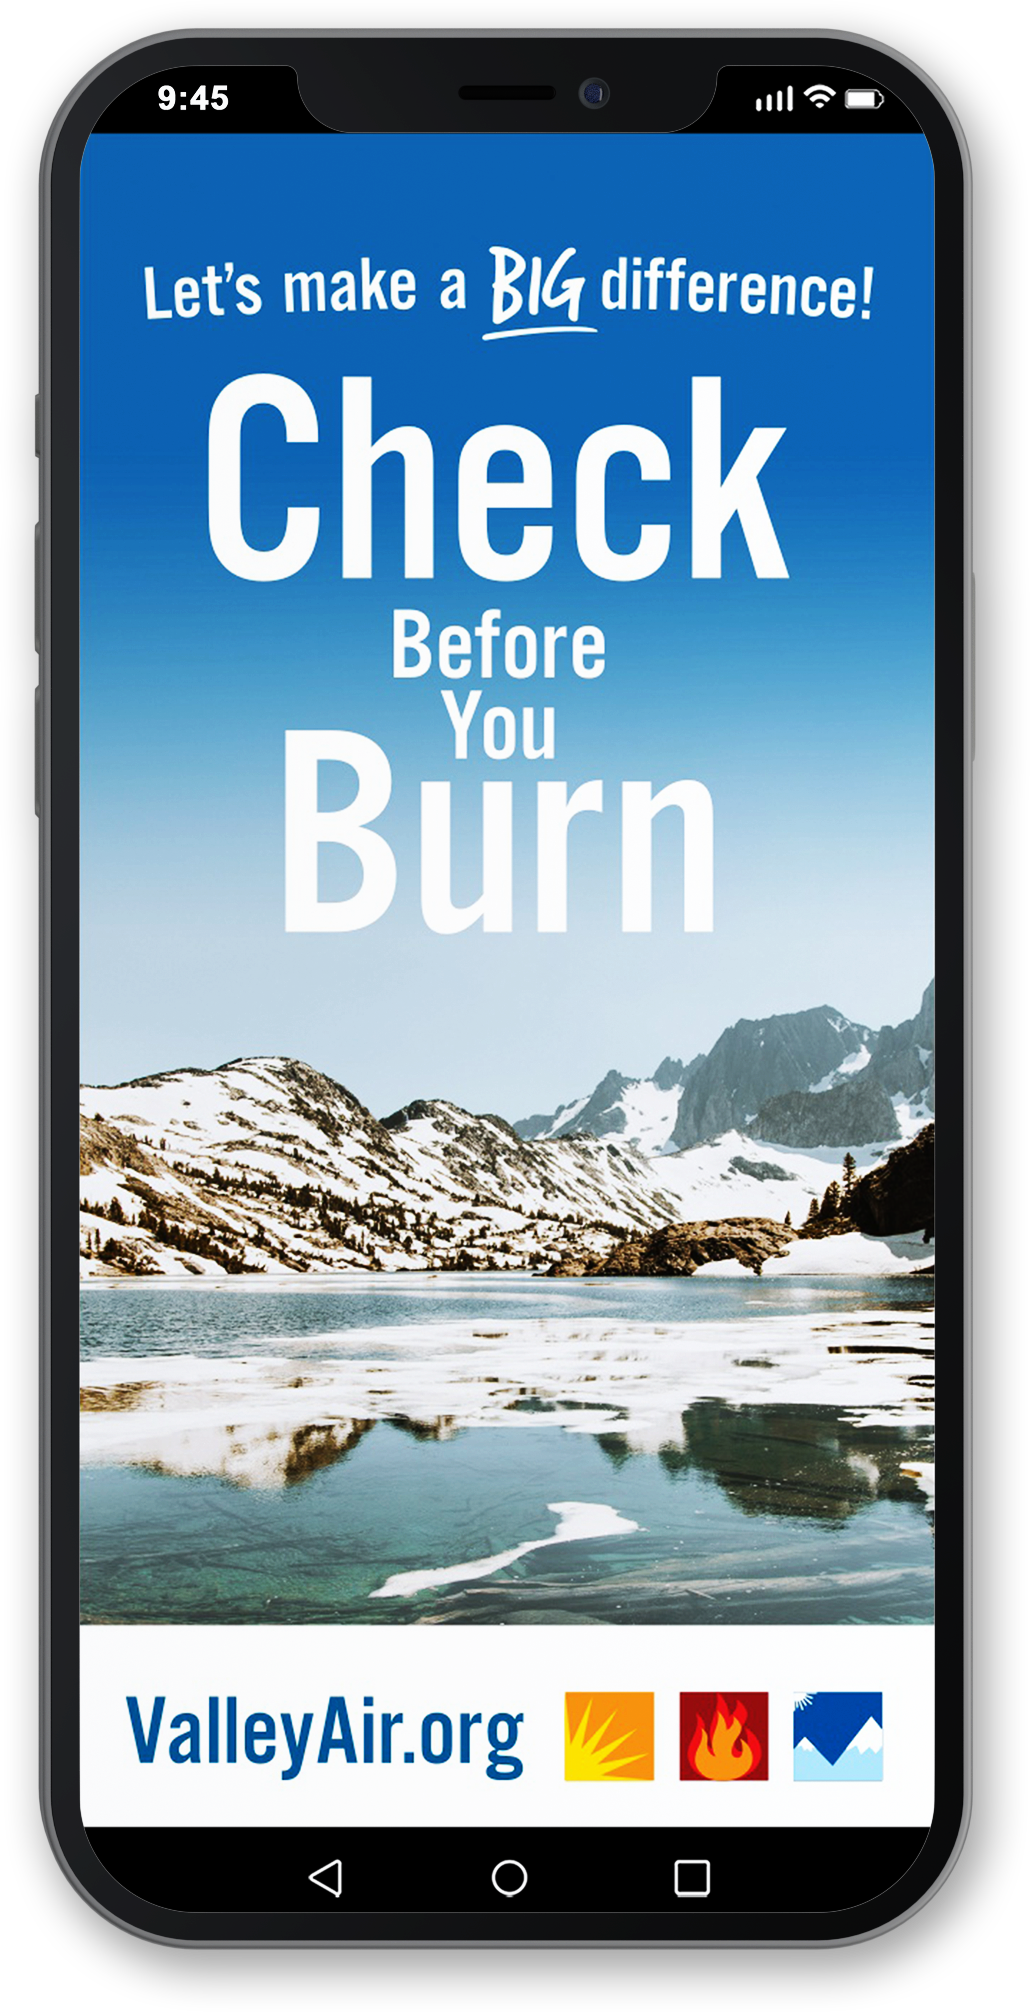 Smartphone on a transparent background showing the Valley Air District's website promoting its Check Before You Burn campaign